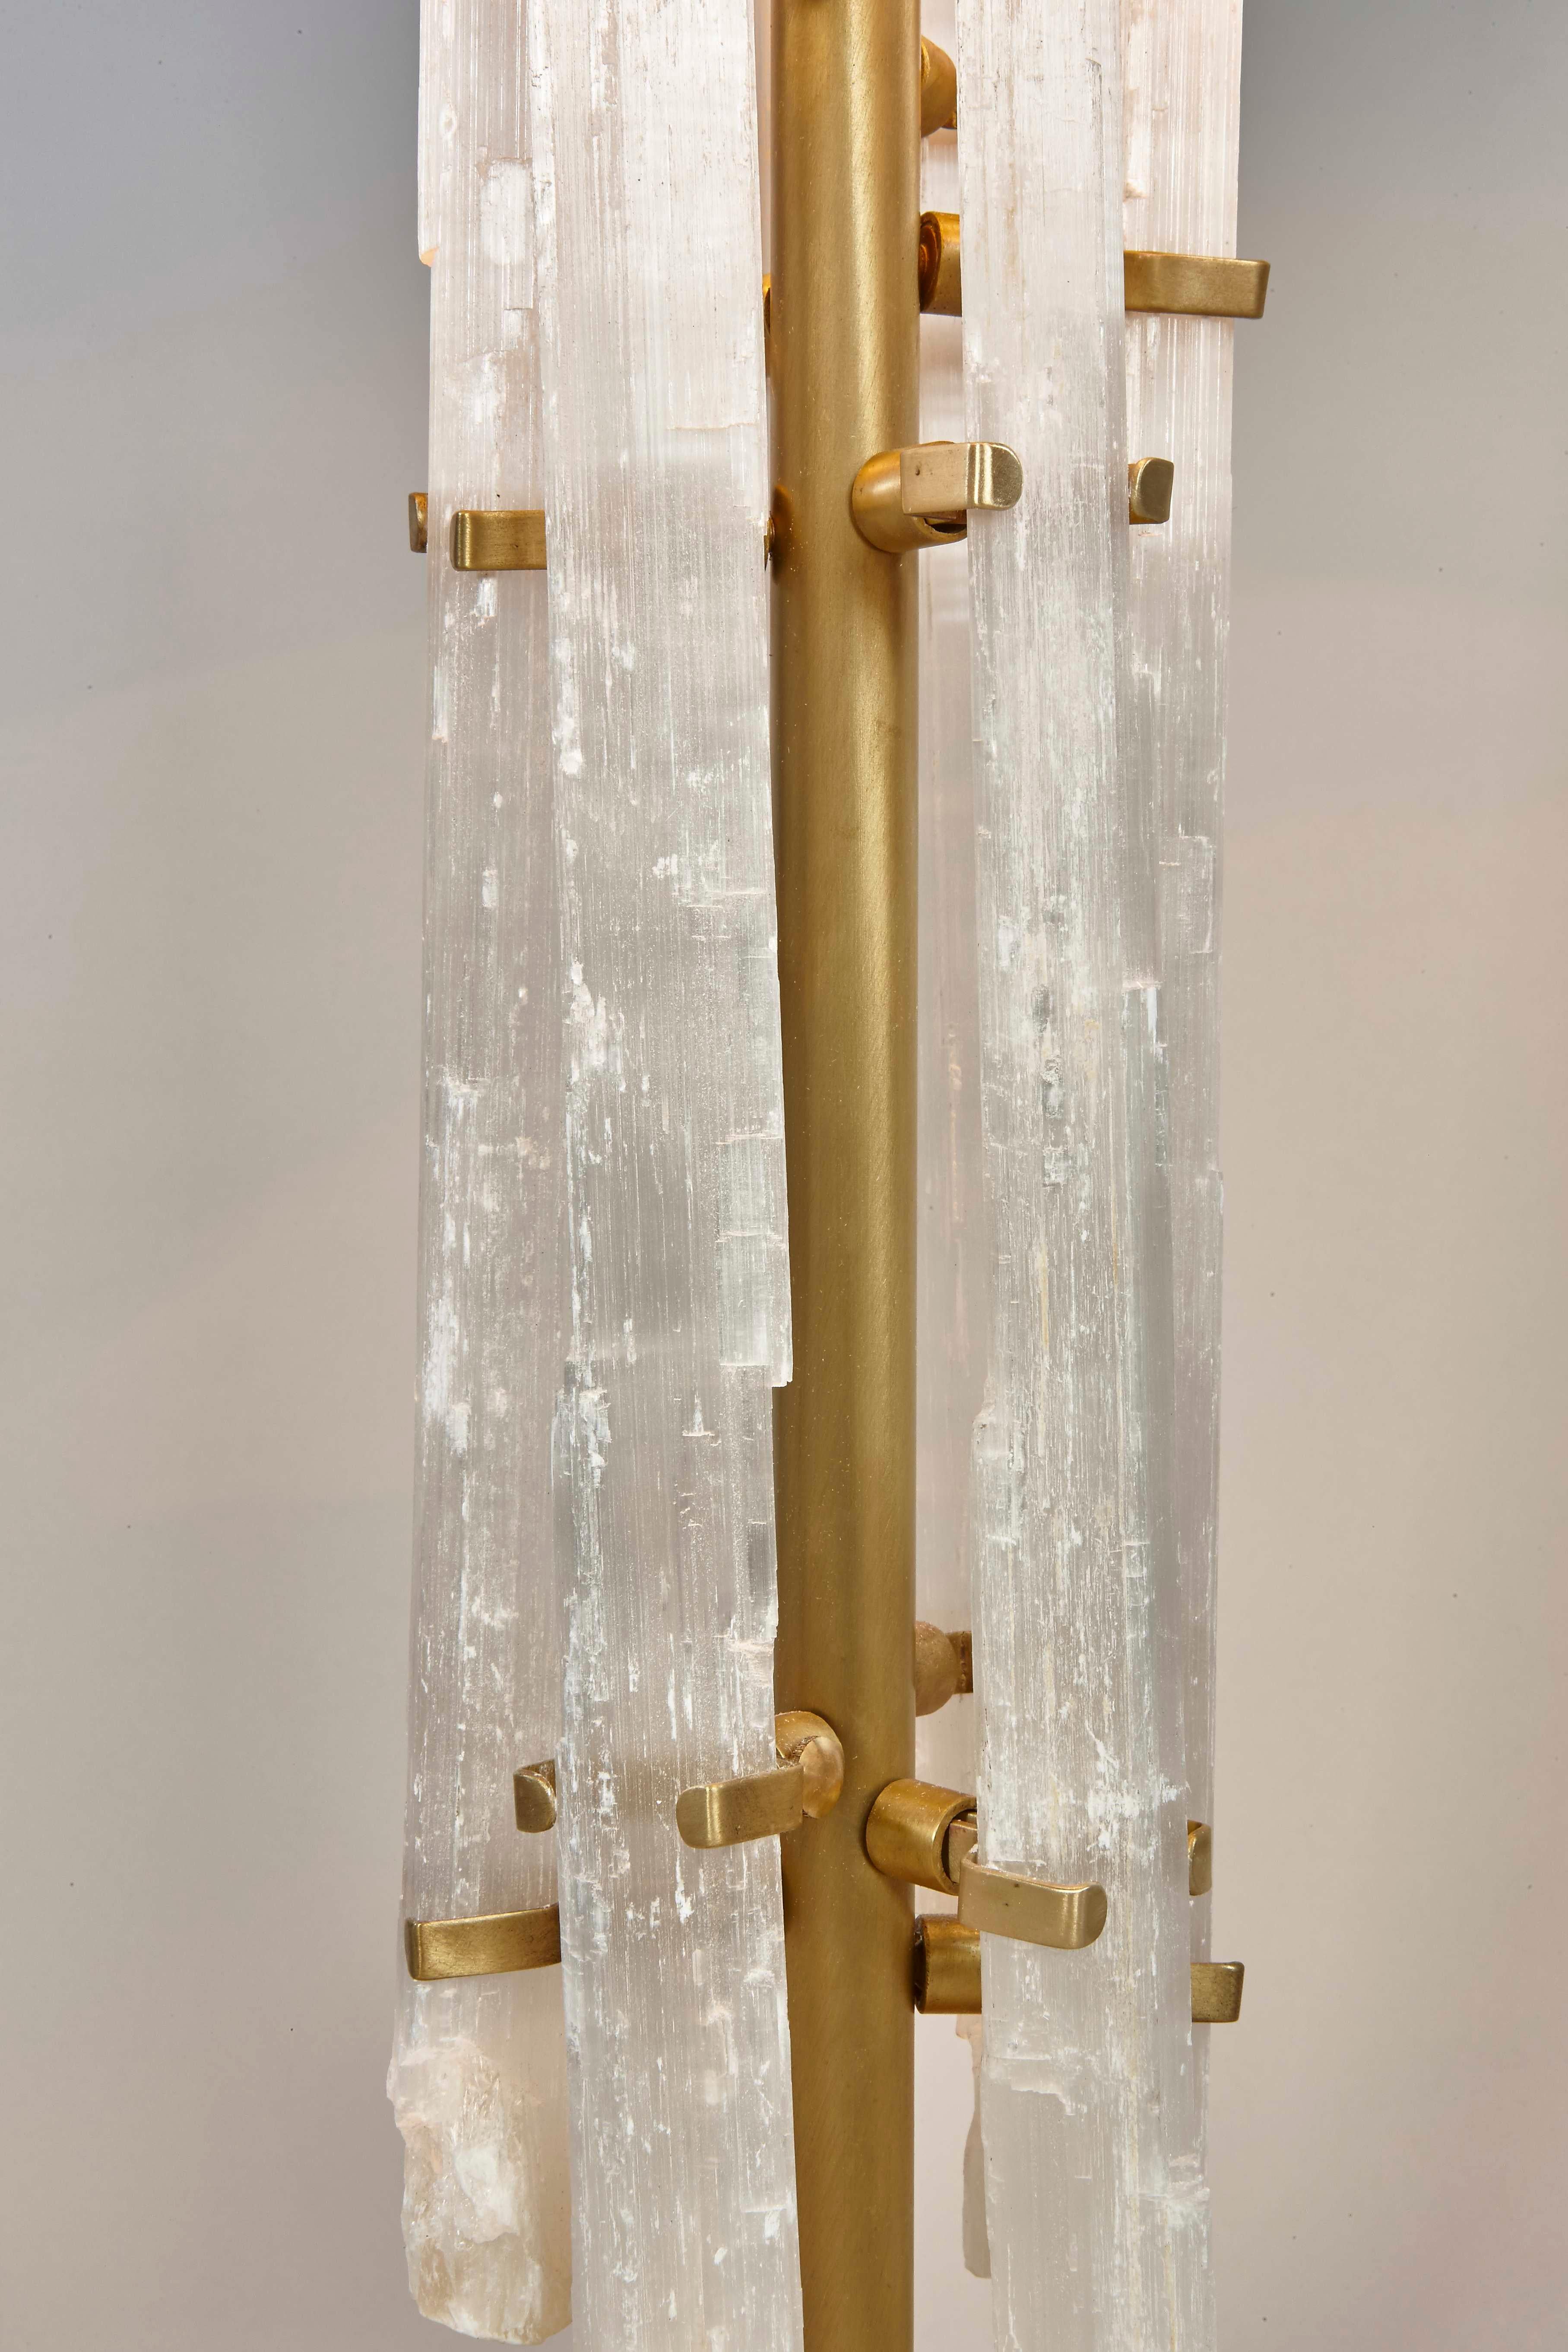 Our Rock Crystal Table lamp is painstakingly handmade, using delicate rock crystal rods organically positioned around a bronze stem. This beautiful lamp creates both elegance and sophistication to any room. We offer different shade fabrics to